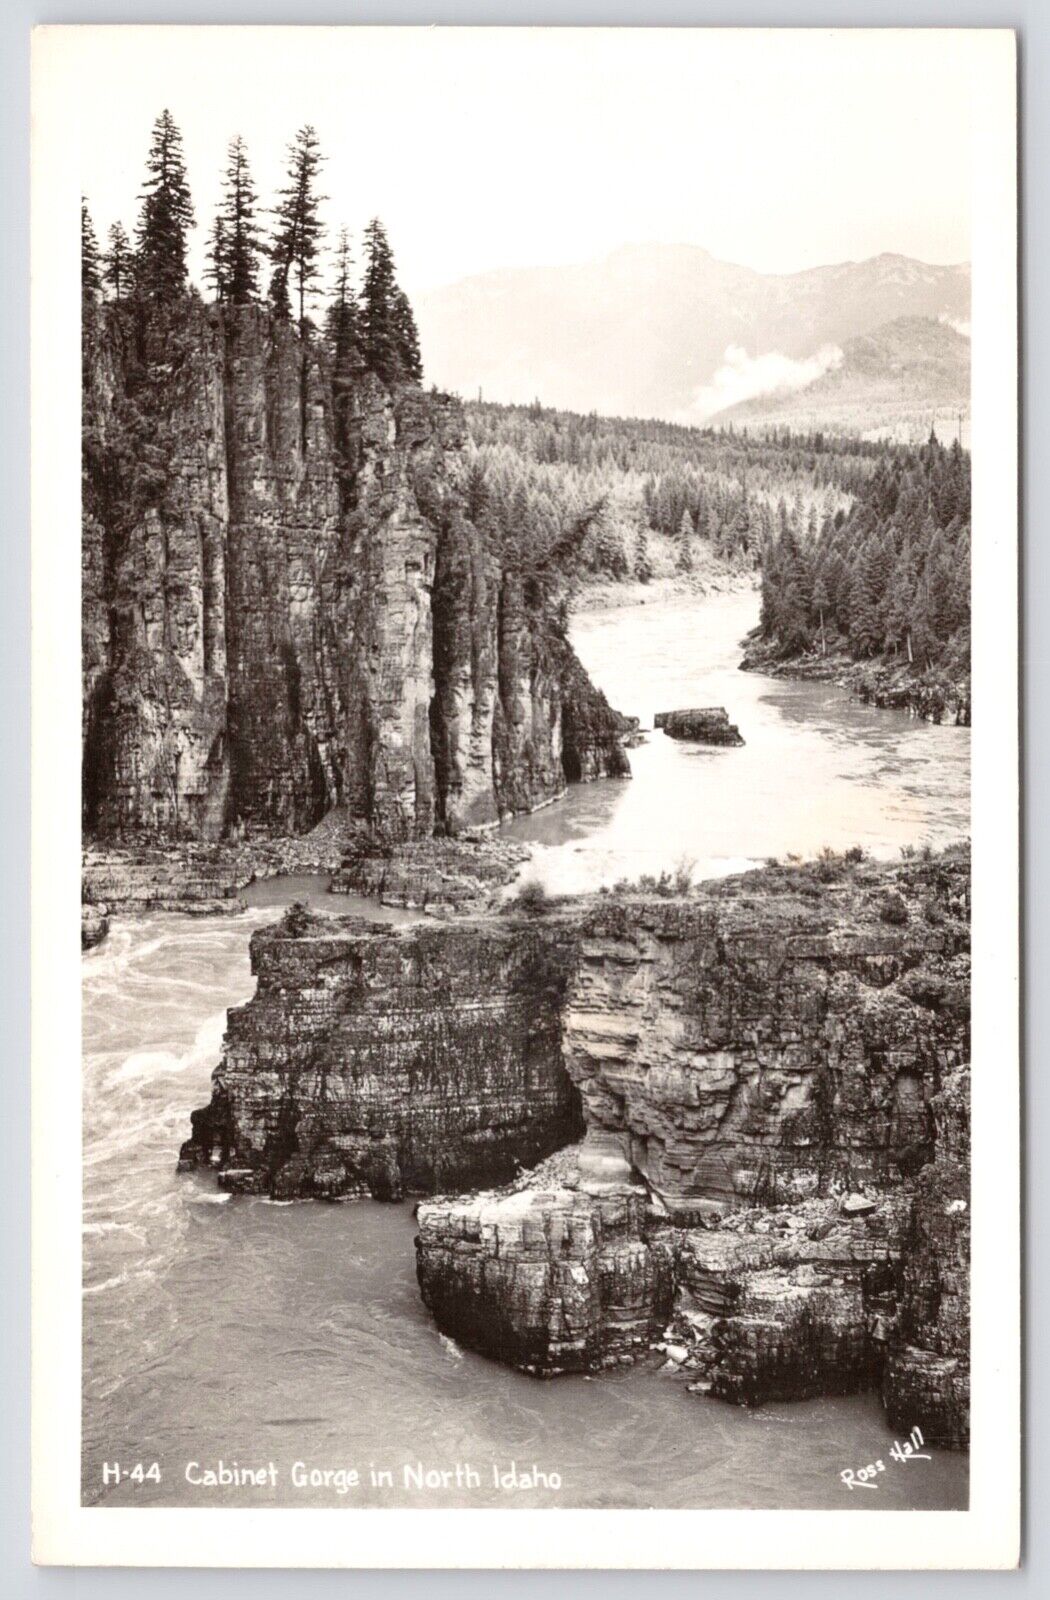 Postcard RPPC Cabinet Gorge and Clark Fork River in North Idaho c1940s